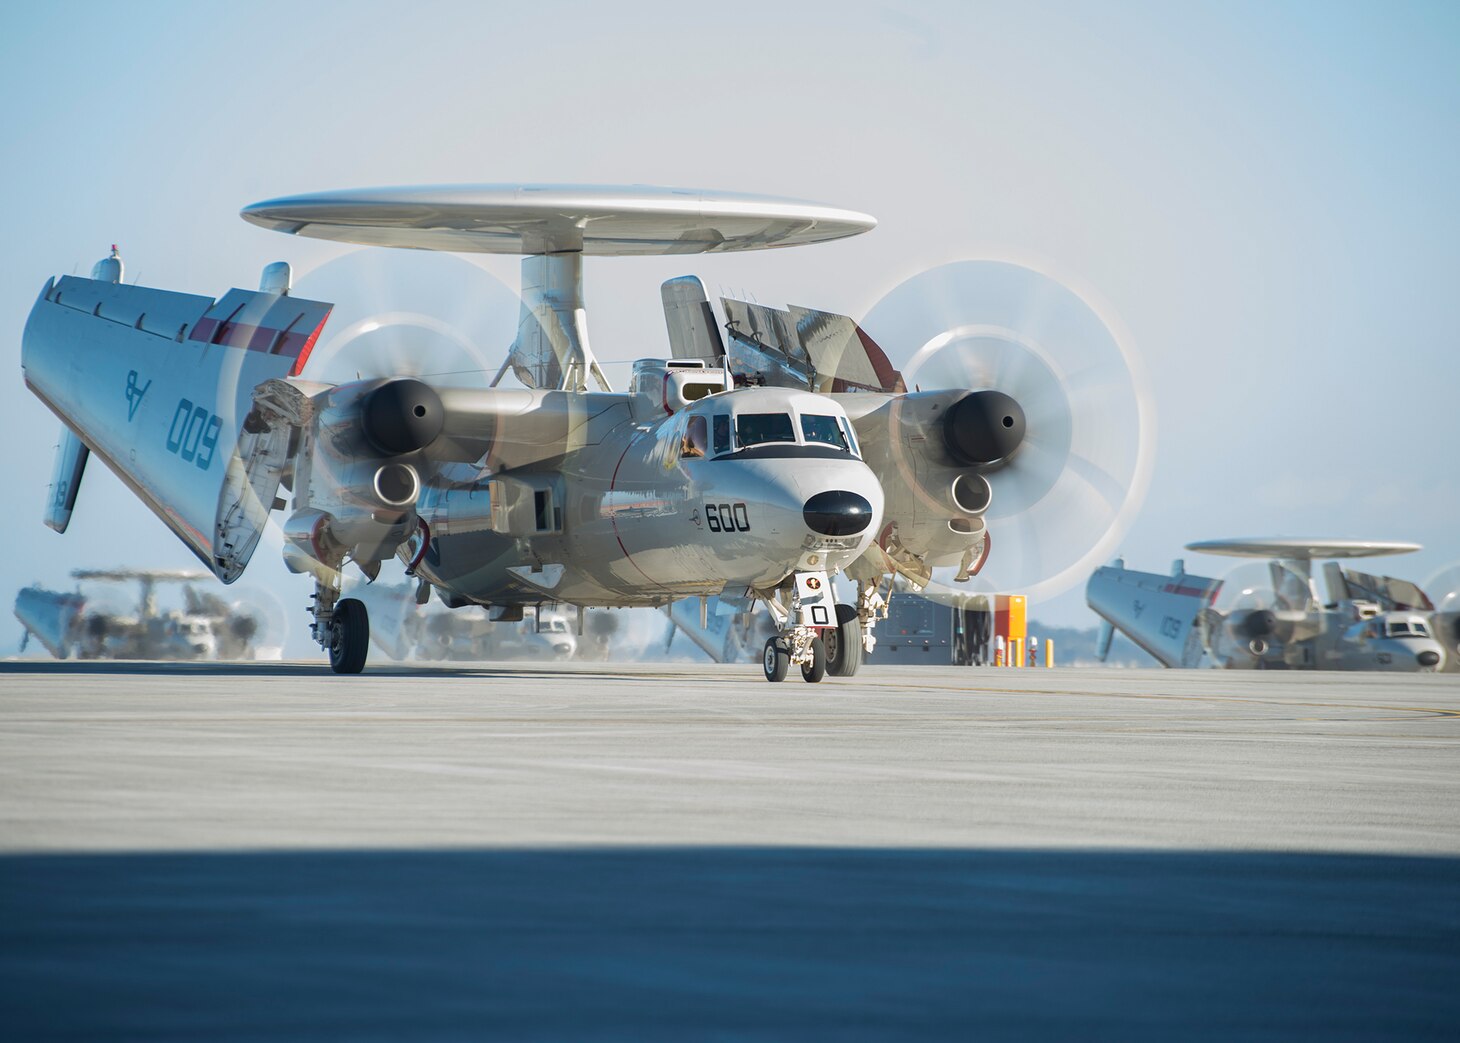 Five E2-D Advanced Hawkeye aircrafts, assigned to the Tigertails of Carrier Airborne Early Warning Squadron (VAW) 125, taxi the runway after arriving onboard Marine Corps Air Station Iwakuni, Feb. 2, 2017. VAW-125 will relieve VAW-115 as the airborne early warning squadron for Carrier Air Wing (CVW) 5 in support of the USS Ronald Reagan (CVN 76) Carrier Strike Group.